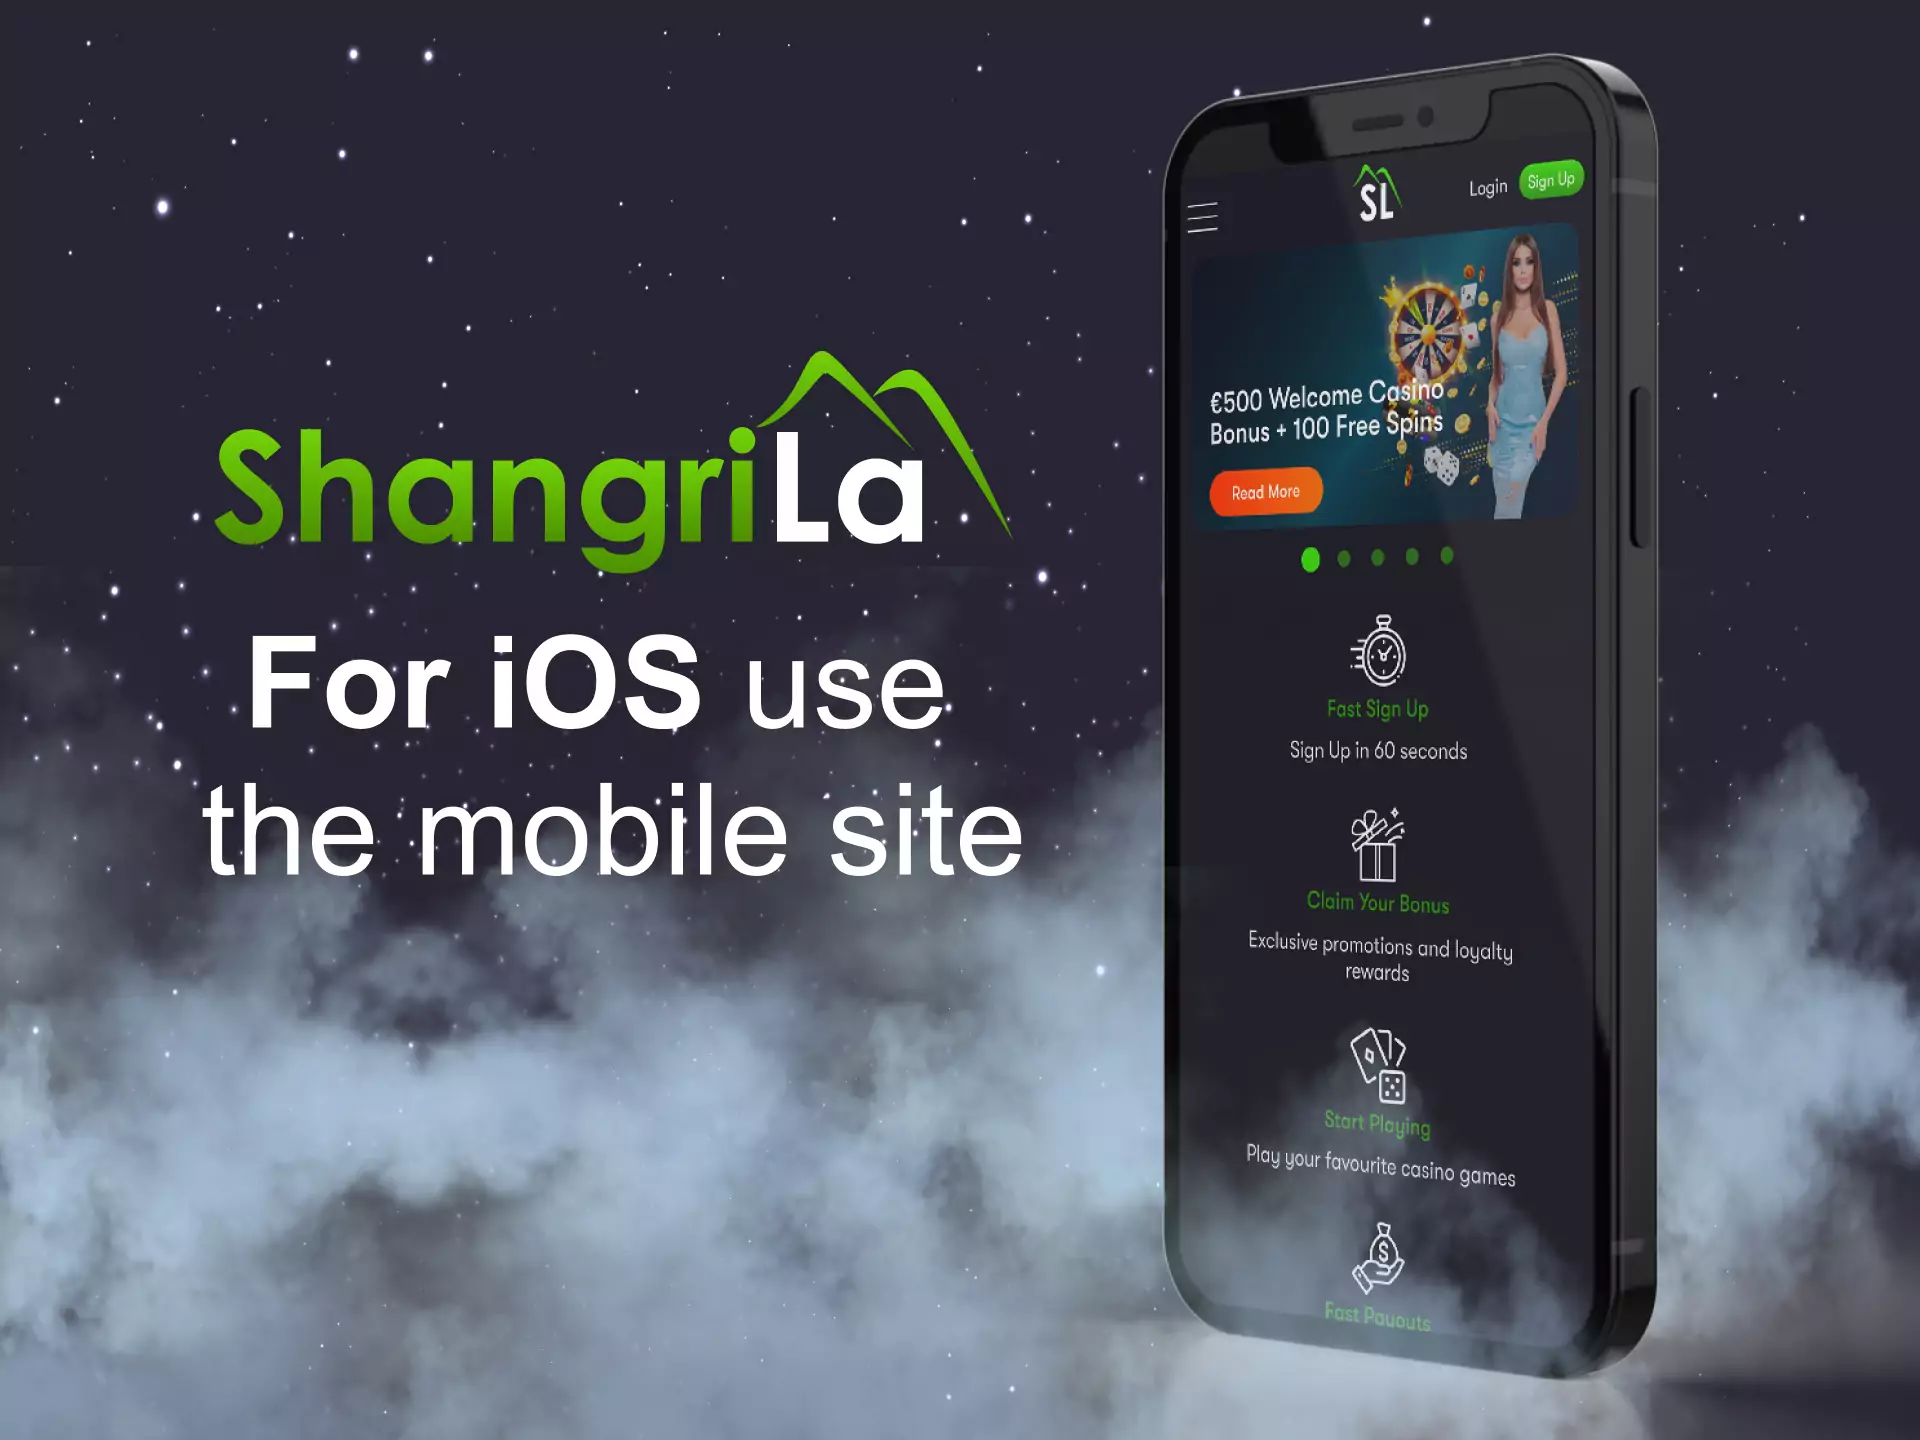 On iOS devices, use the Shangri La mobile website.